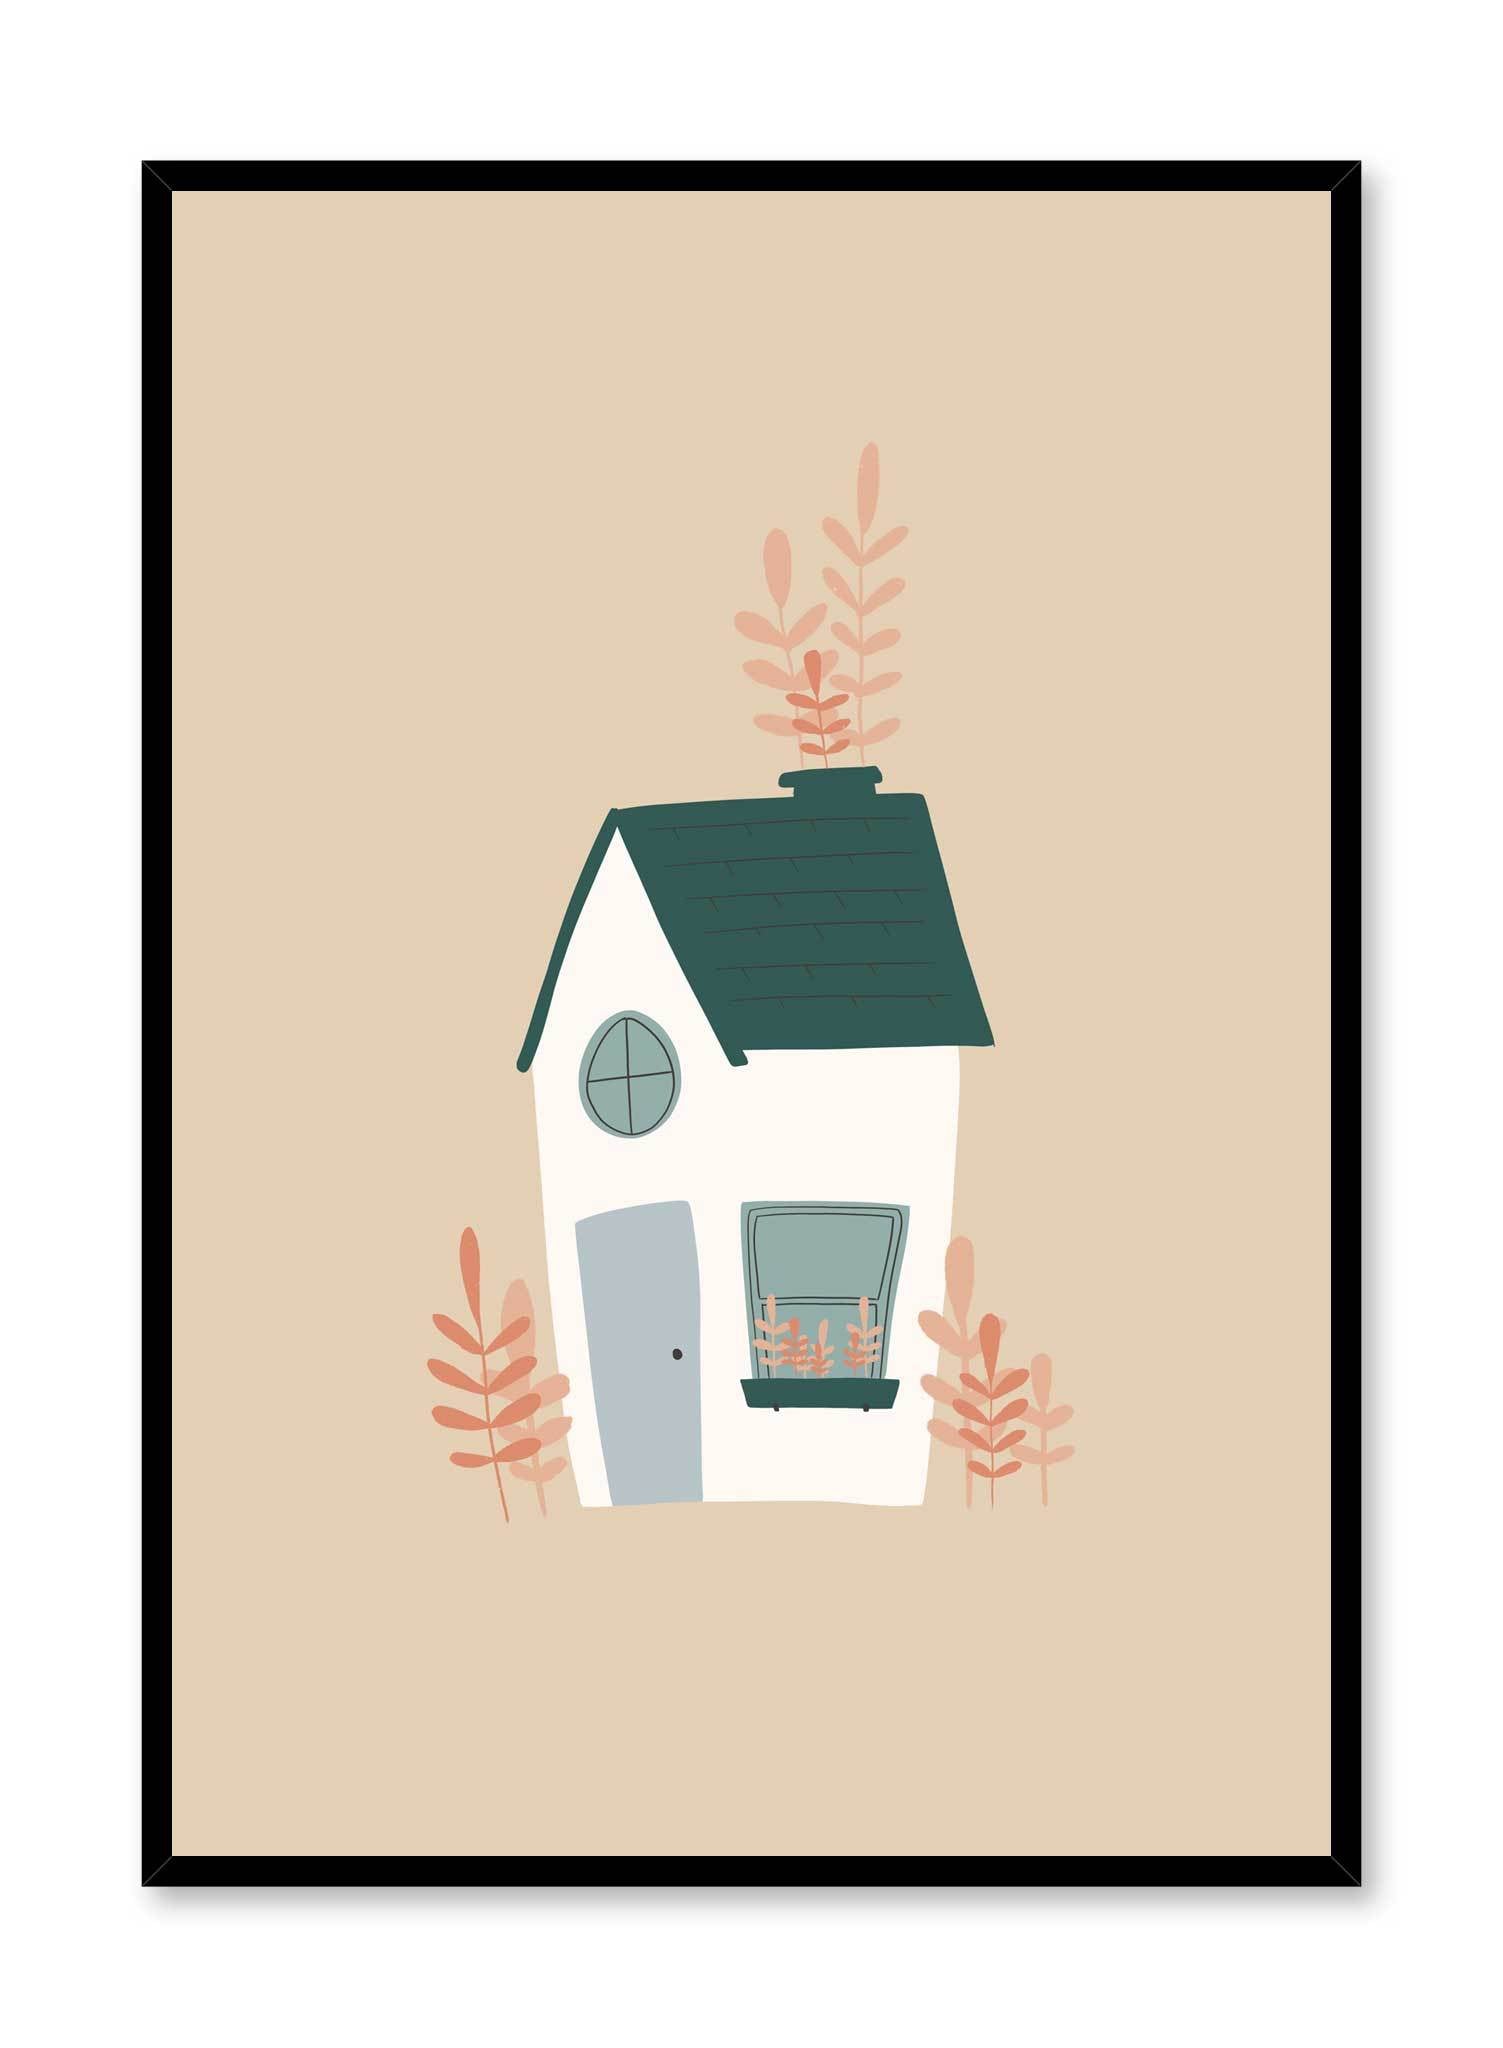 Mama, I’m Home! is a minimalist illustration by Opposite Wall of a single white house with a green roof in plain nature.